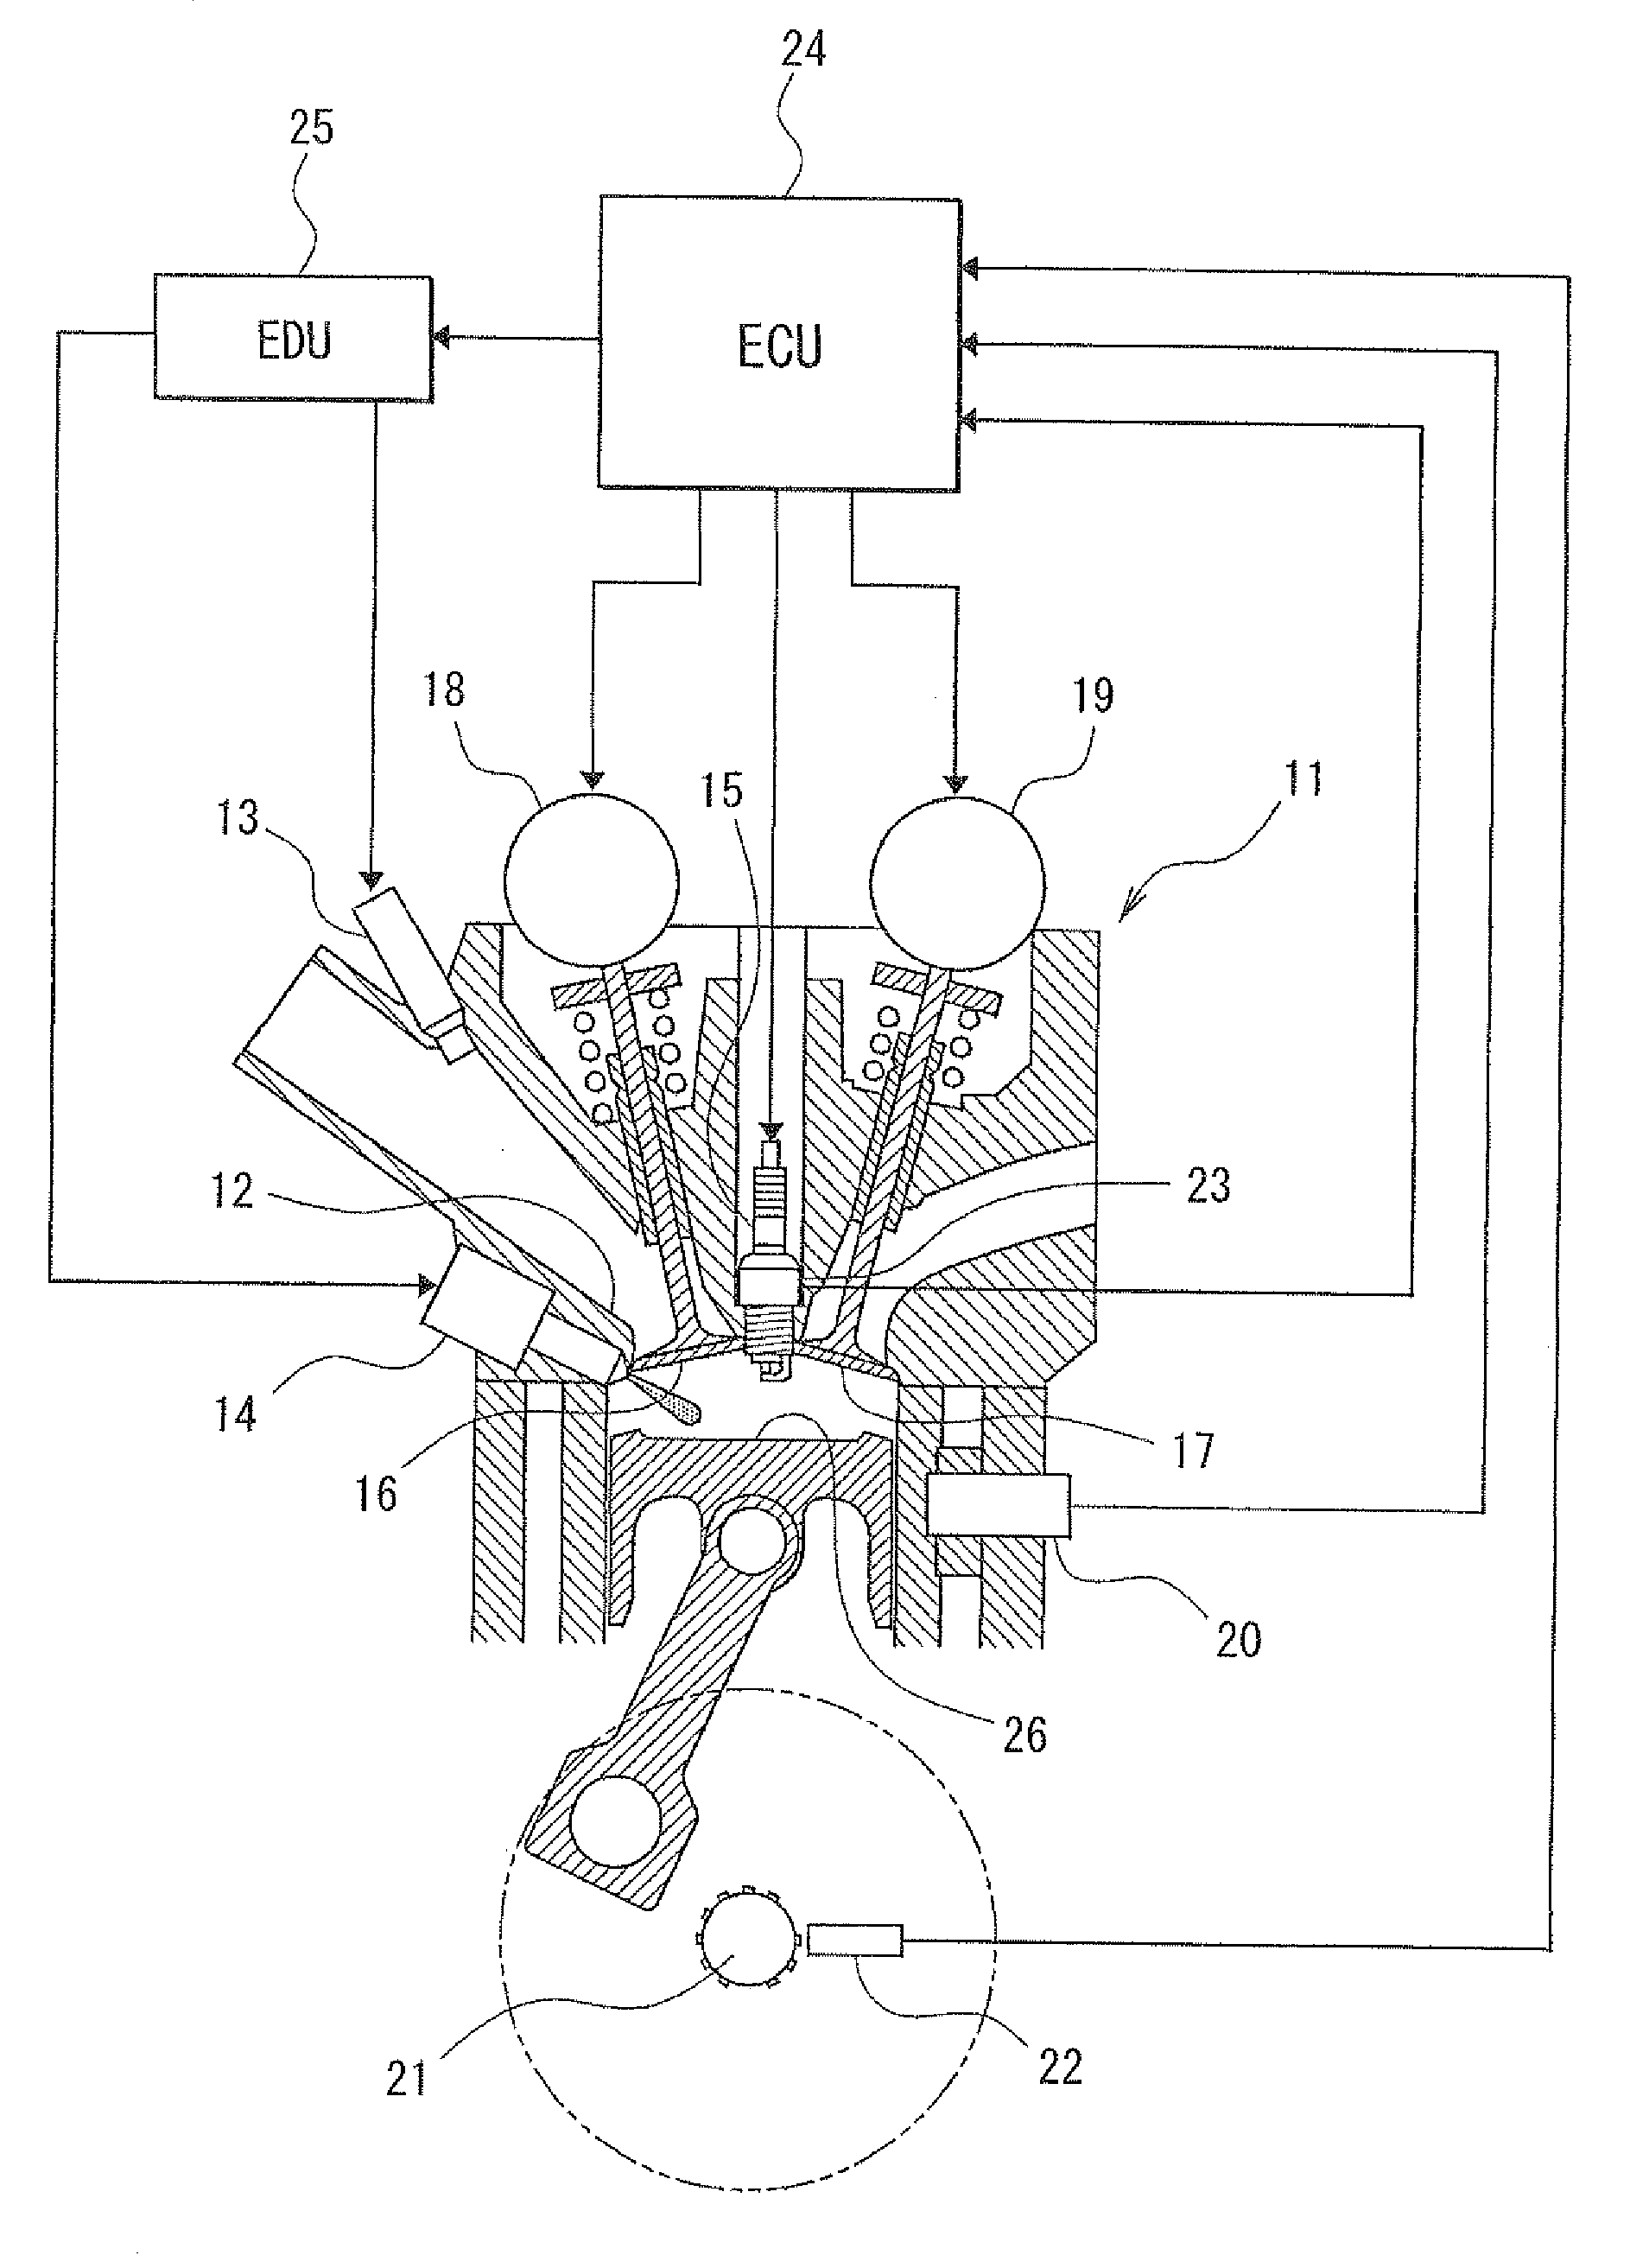 Controller of internal combustion engine